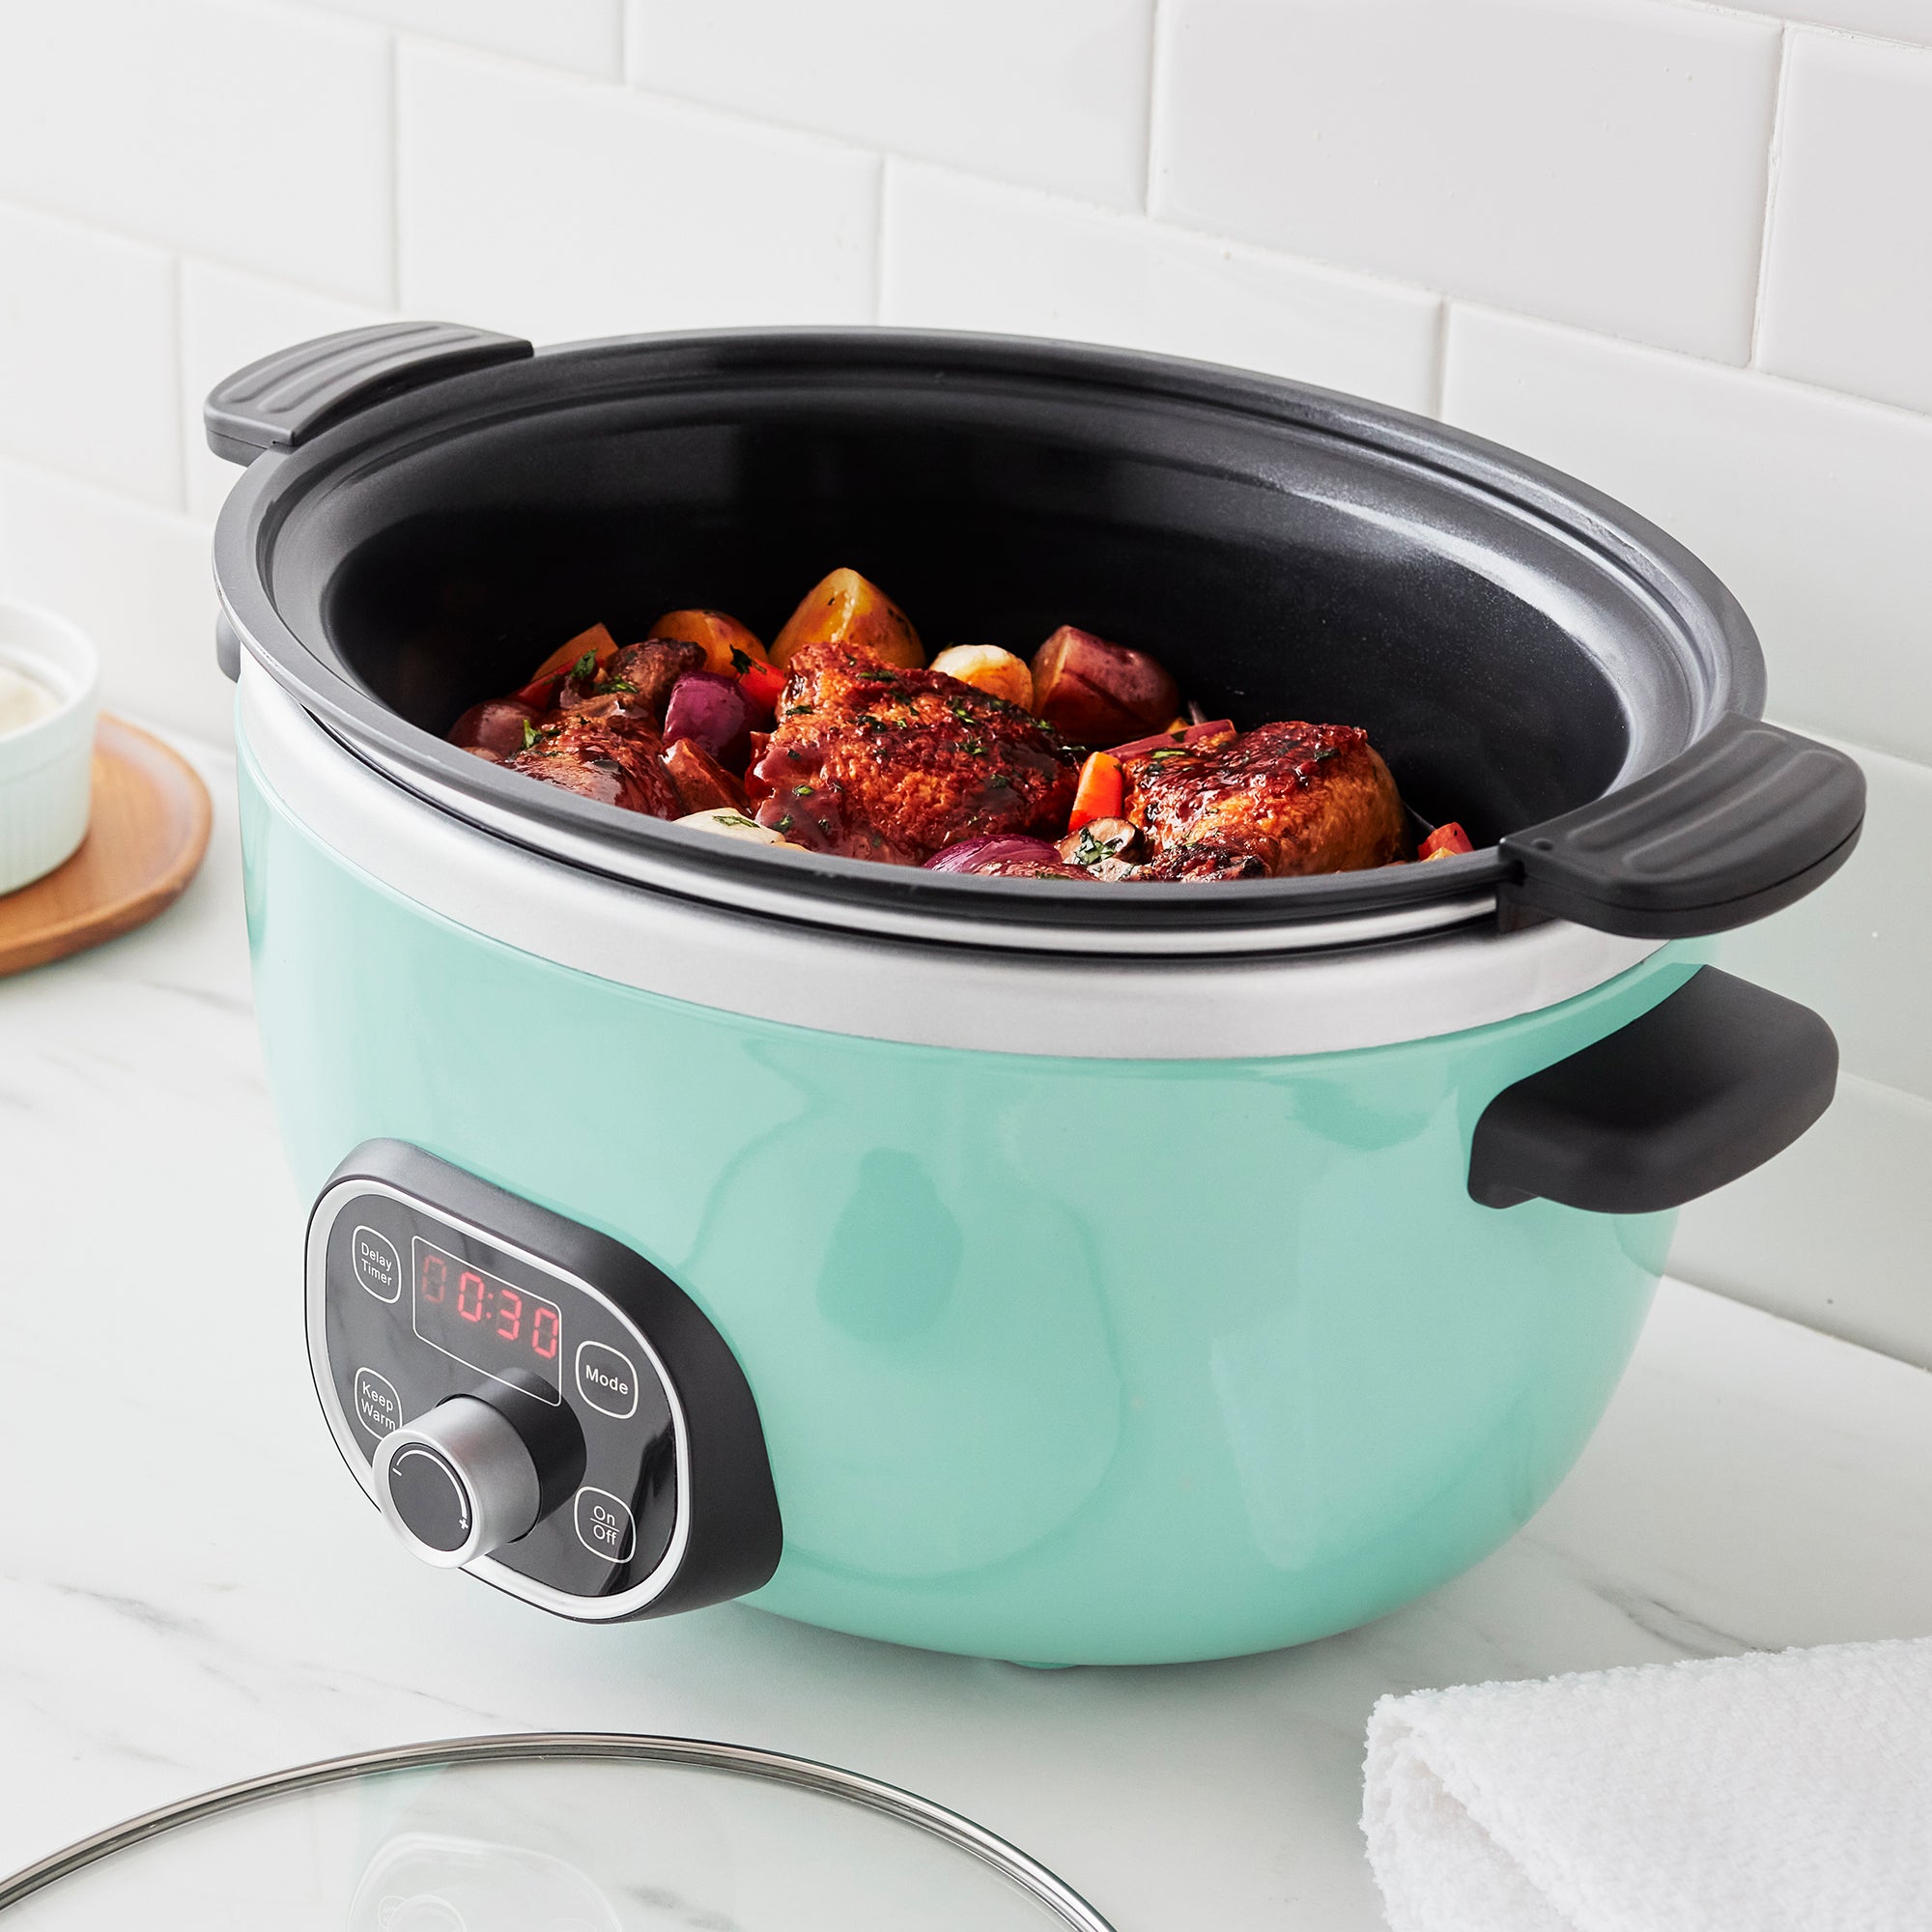 GreenLife Healthy Ceramic Nonstick, 6QT Slow Cooker, Turquoise